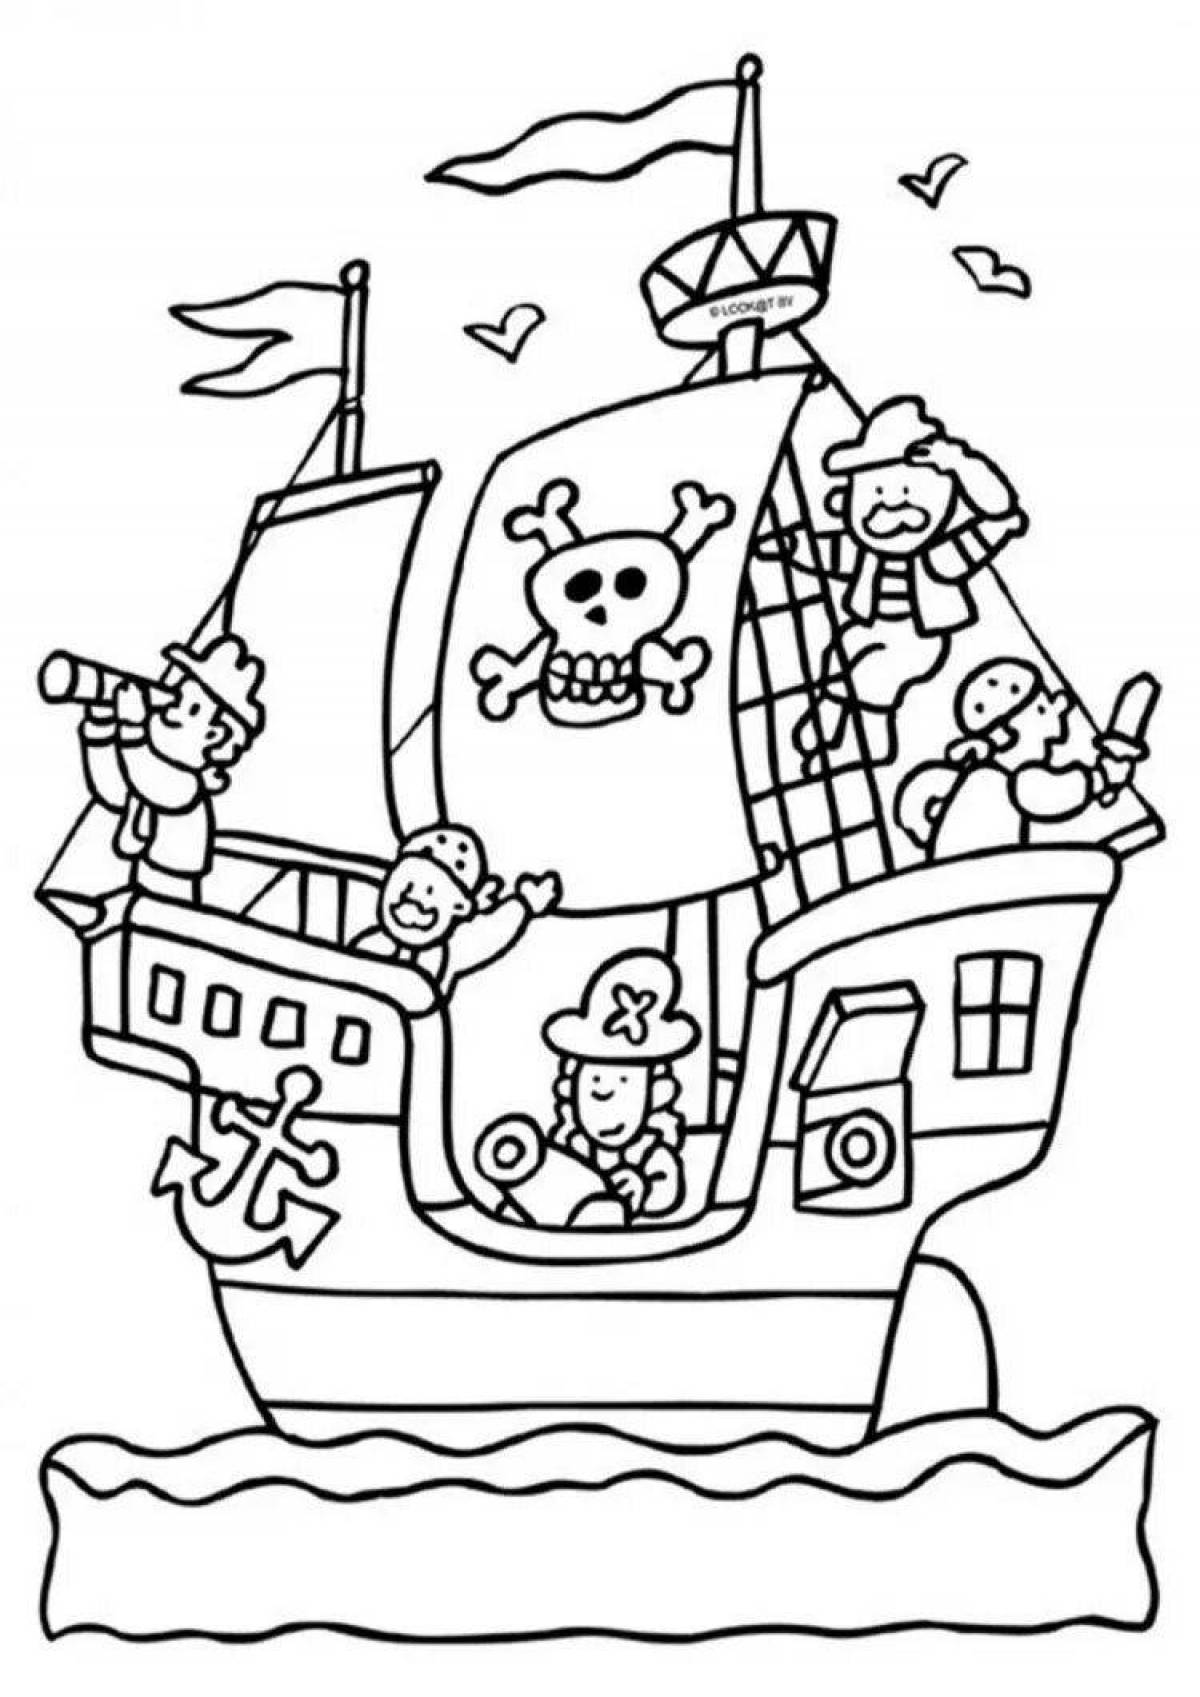 Bold pirate ship coloring page for kids